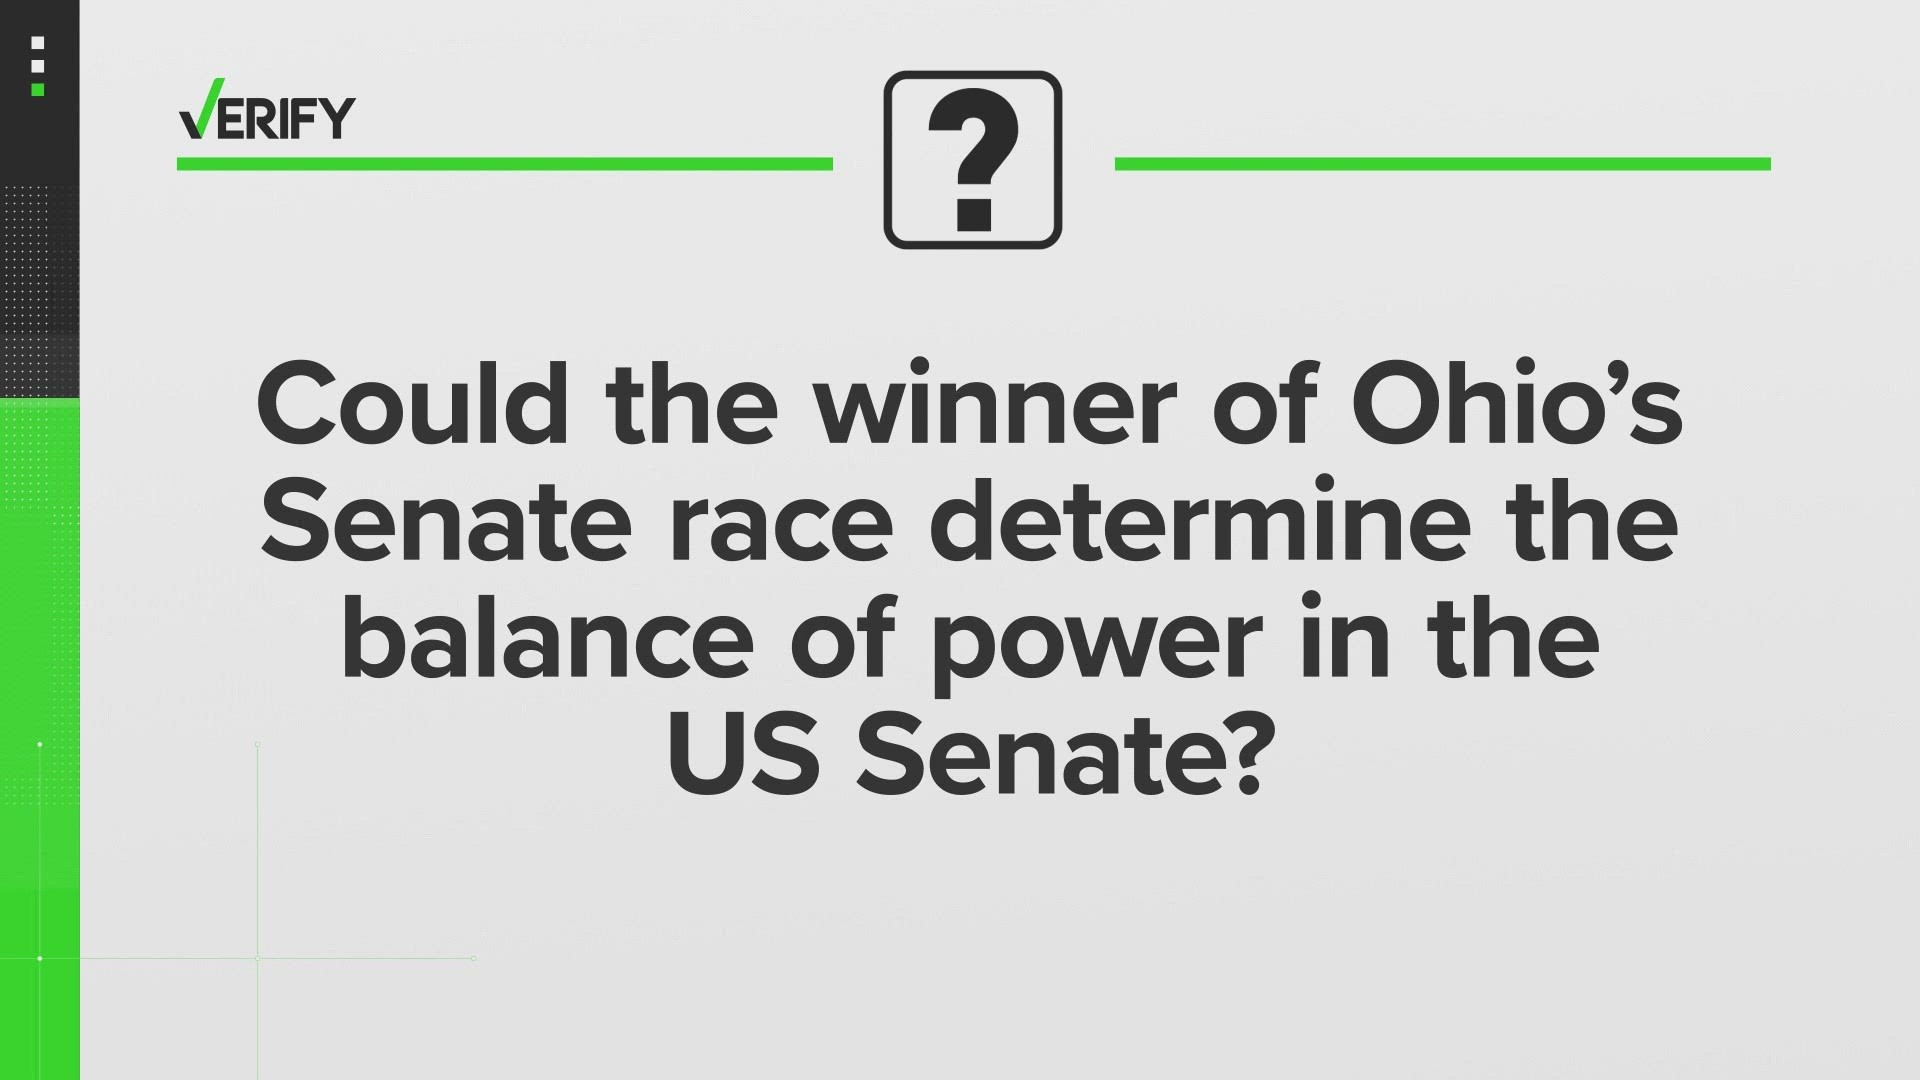 Ohio’s Senate race is considered one of the three most competitive Senate races in the country.